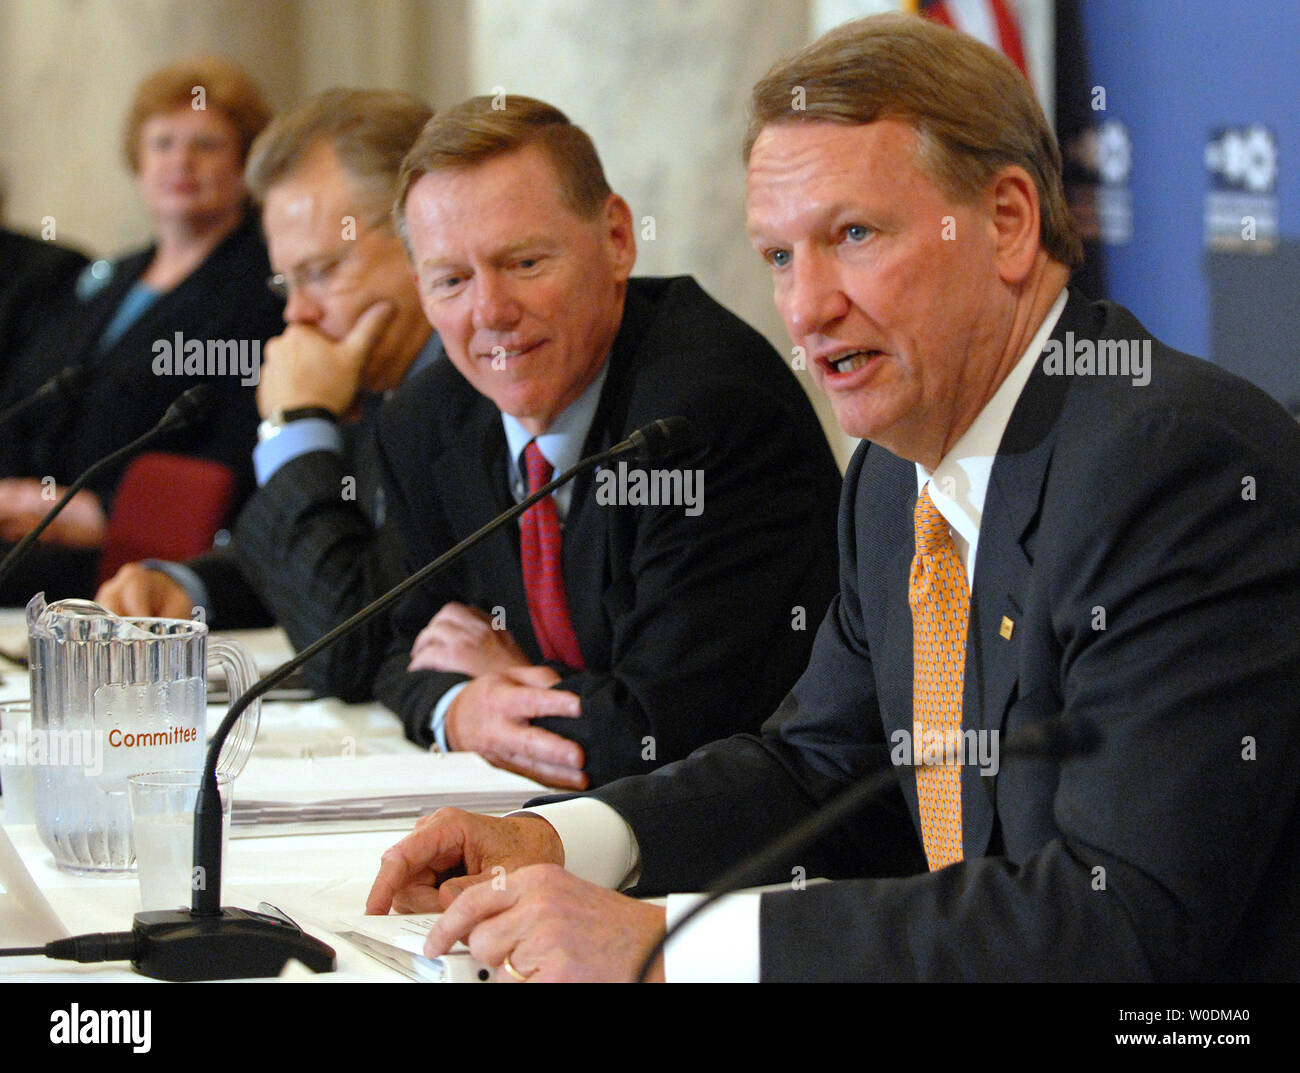 Rick Wagoner, CEO of General Motors, speaks during a luncheon summit about 'The Future of the Domestic Auto Industry' on Capitol Hill in Washington on June 6, 2007. From left are Sen. Debbie Stabenow, D-MI, Tom LaSorda, CEO of Chrysler Group, Alan Mulally, CEO of Ford Motor Company, and Wagoner.  (UPI Photo/Roger L. Wollenberg) Stock Photo